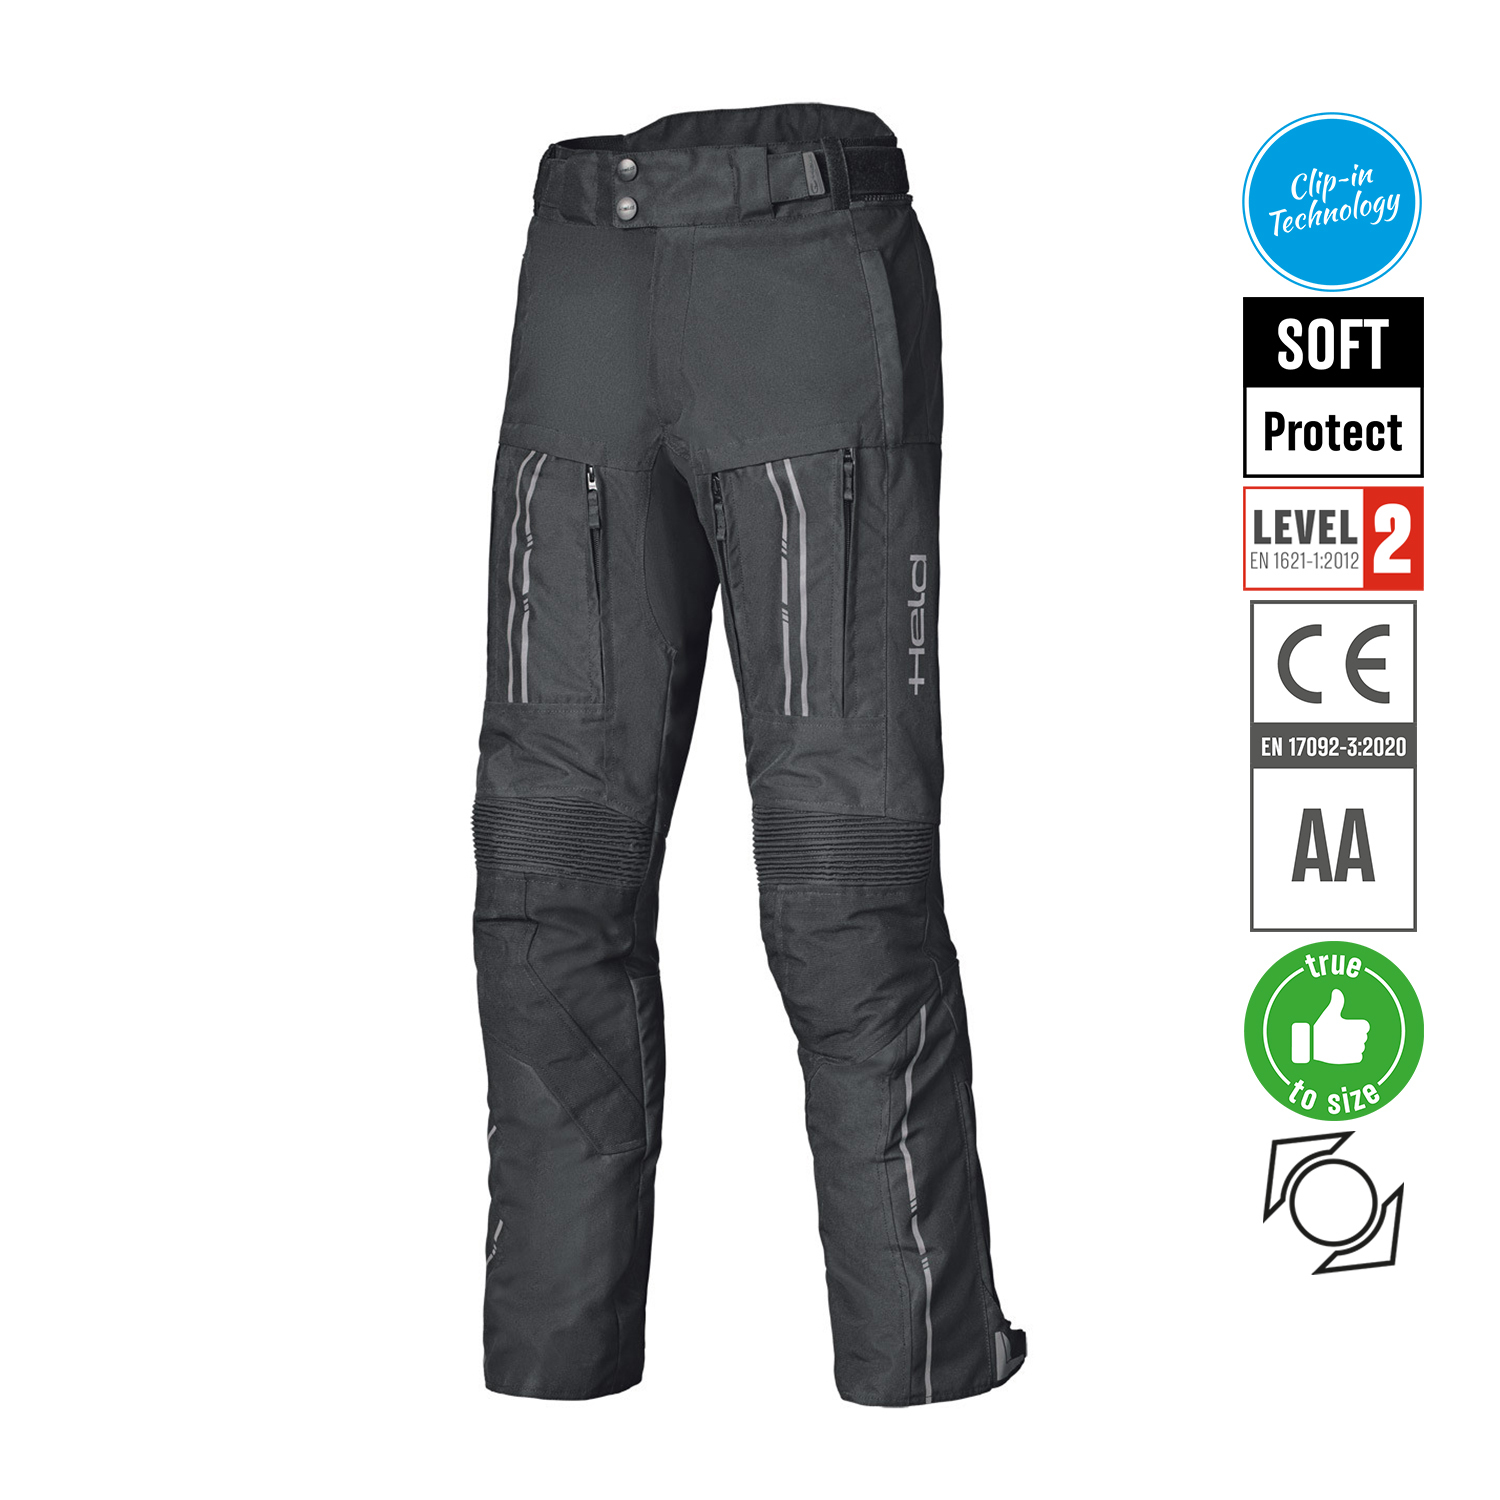 Held Pentland Pants Black - Available in Various Sizes